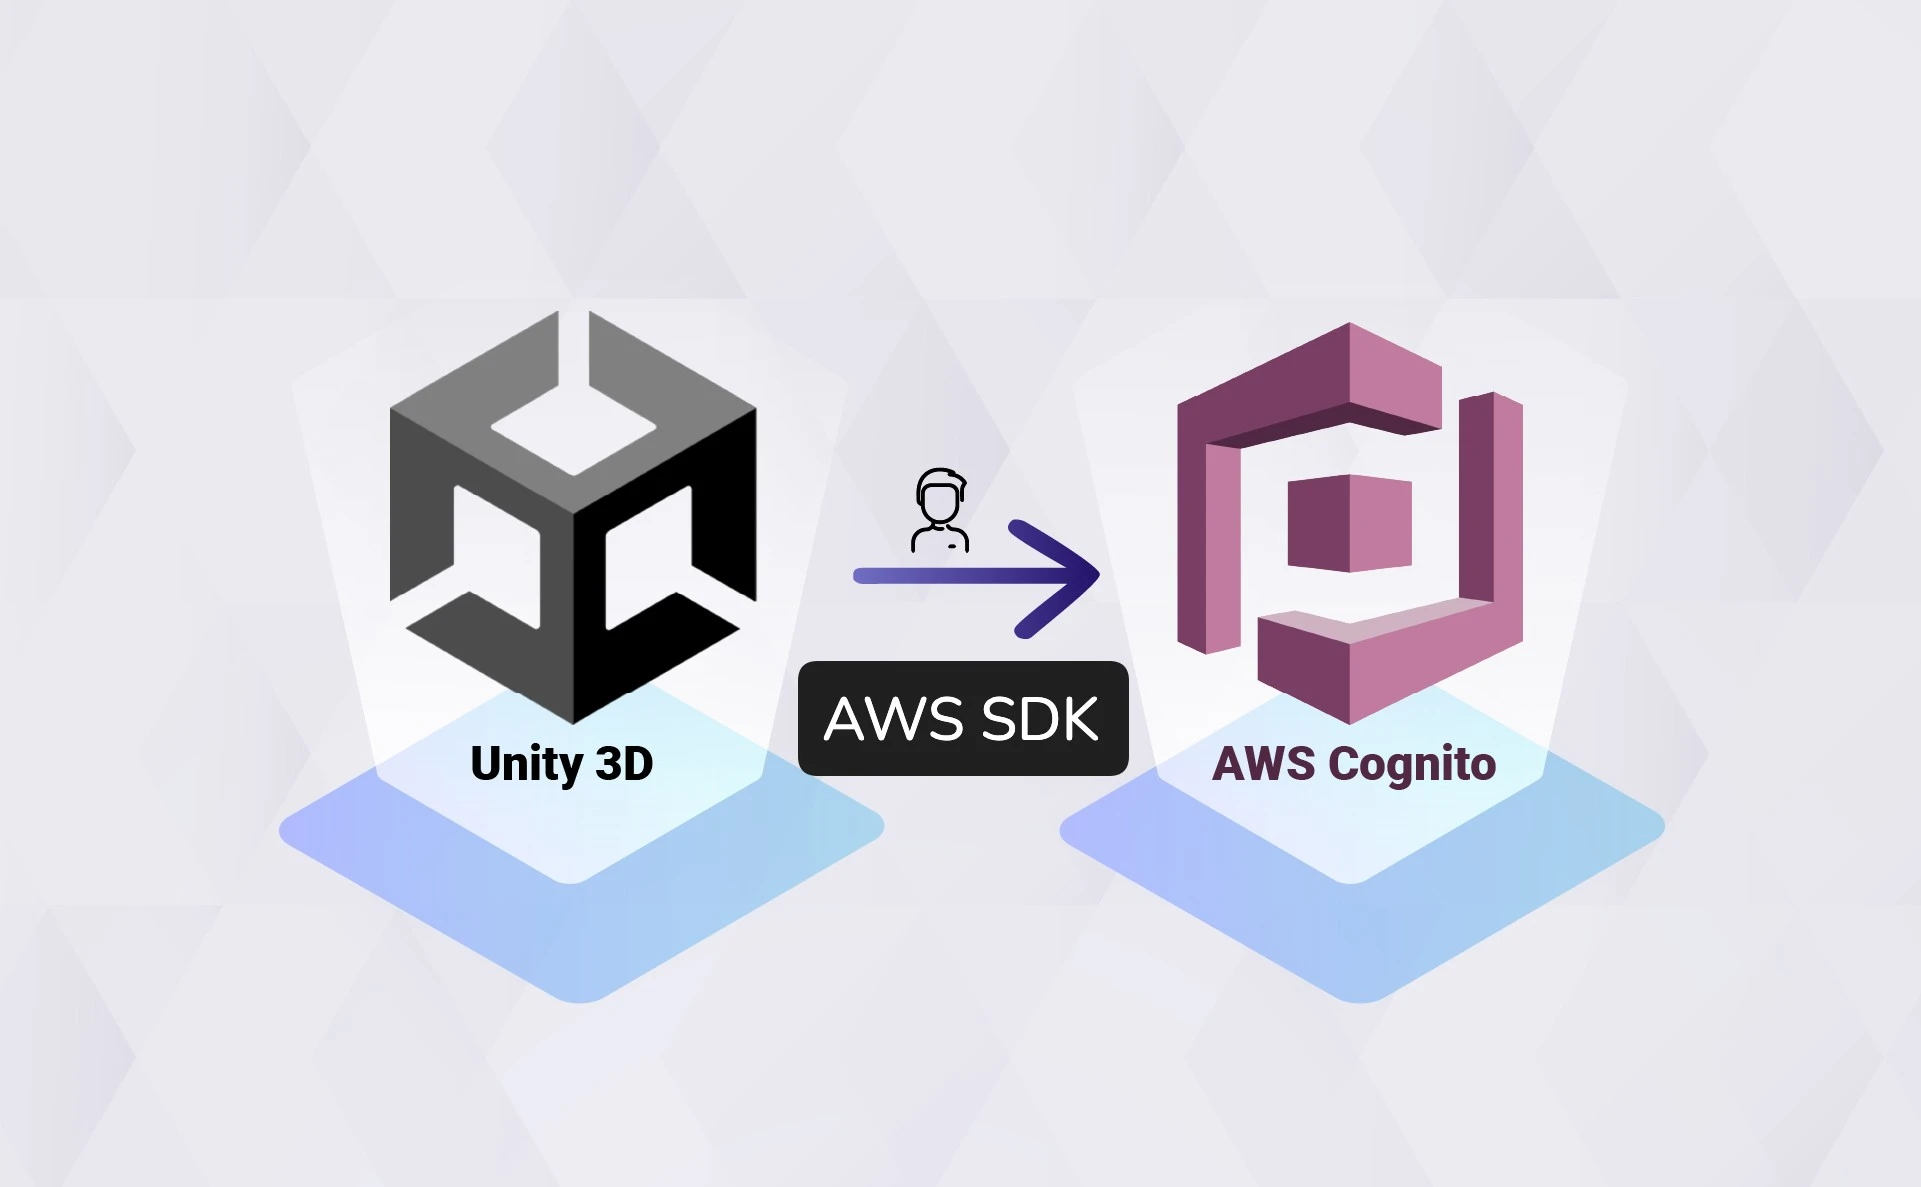 Signing Up Users From Unity3D to AWS Cognito Using the AWS SDK for .NET